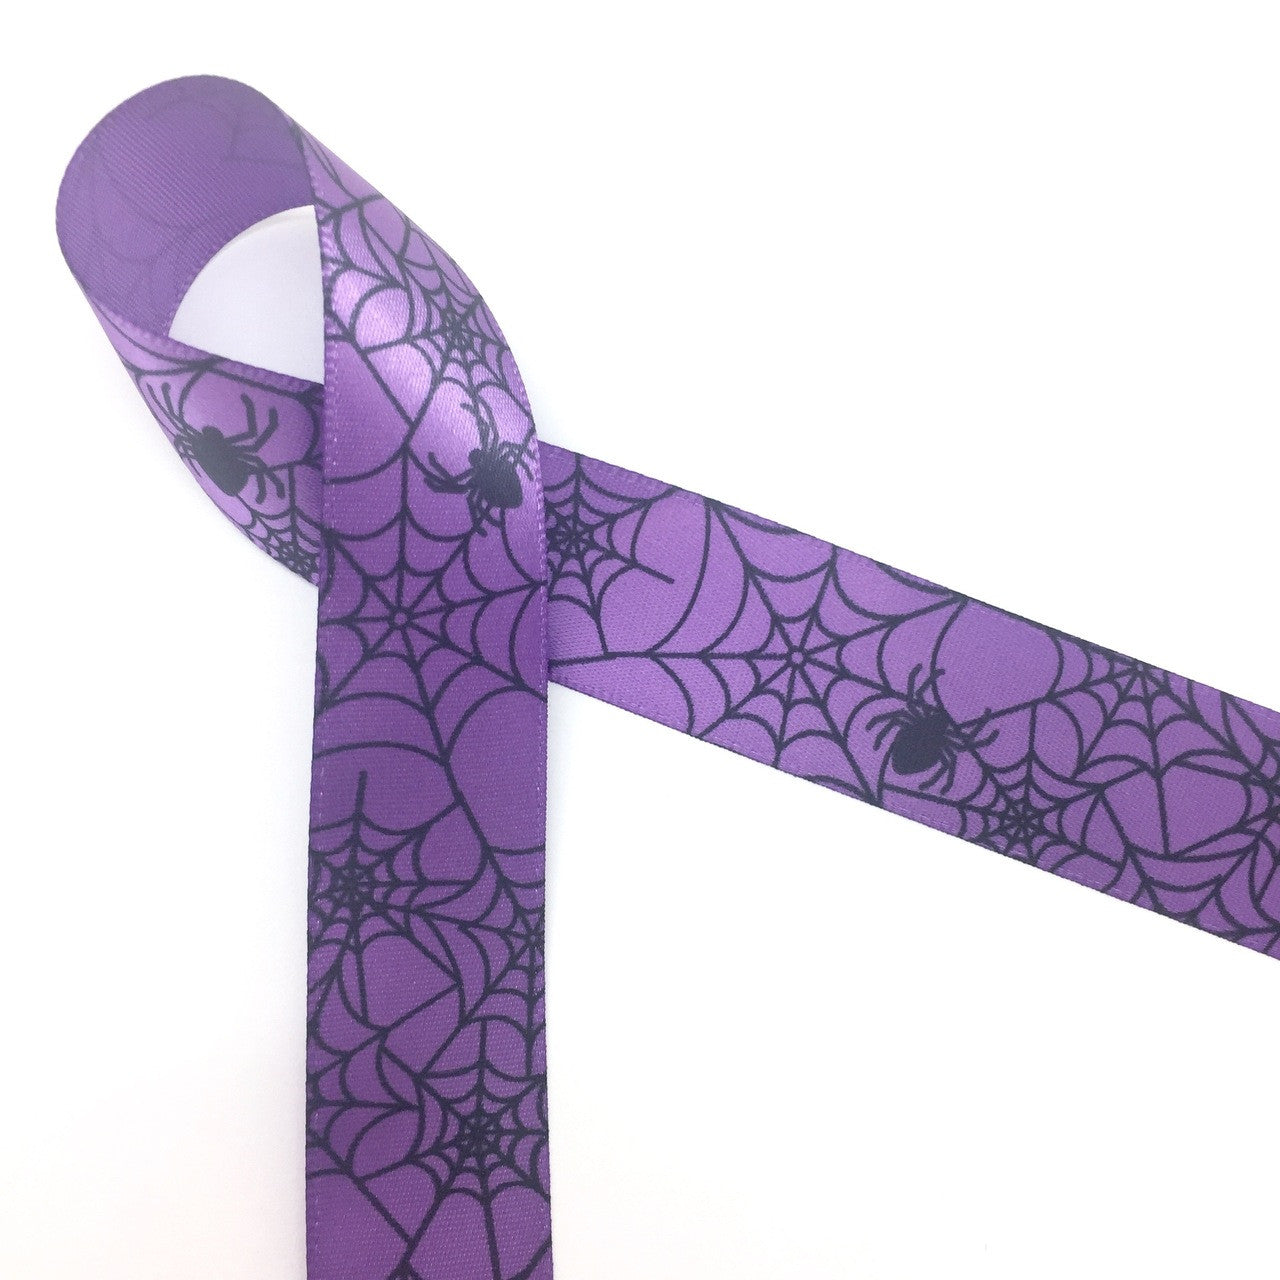 Spider webs and spiders in black printed on 7/8" purple single face satin ribbon is on trend for those who love a traditional Halloween! This ribbon is more sweet than spooky and is ideal for the younger set's Halloween party decor, party favors, gift wrap, treat bags, cookies and cake pops. This is a great ribbon for hair bows, head bands fascinators, sewing and quilting projects too. All our ribbon is designed and printed in the USA